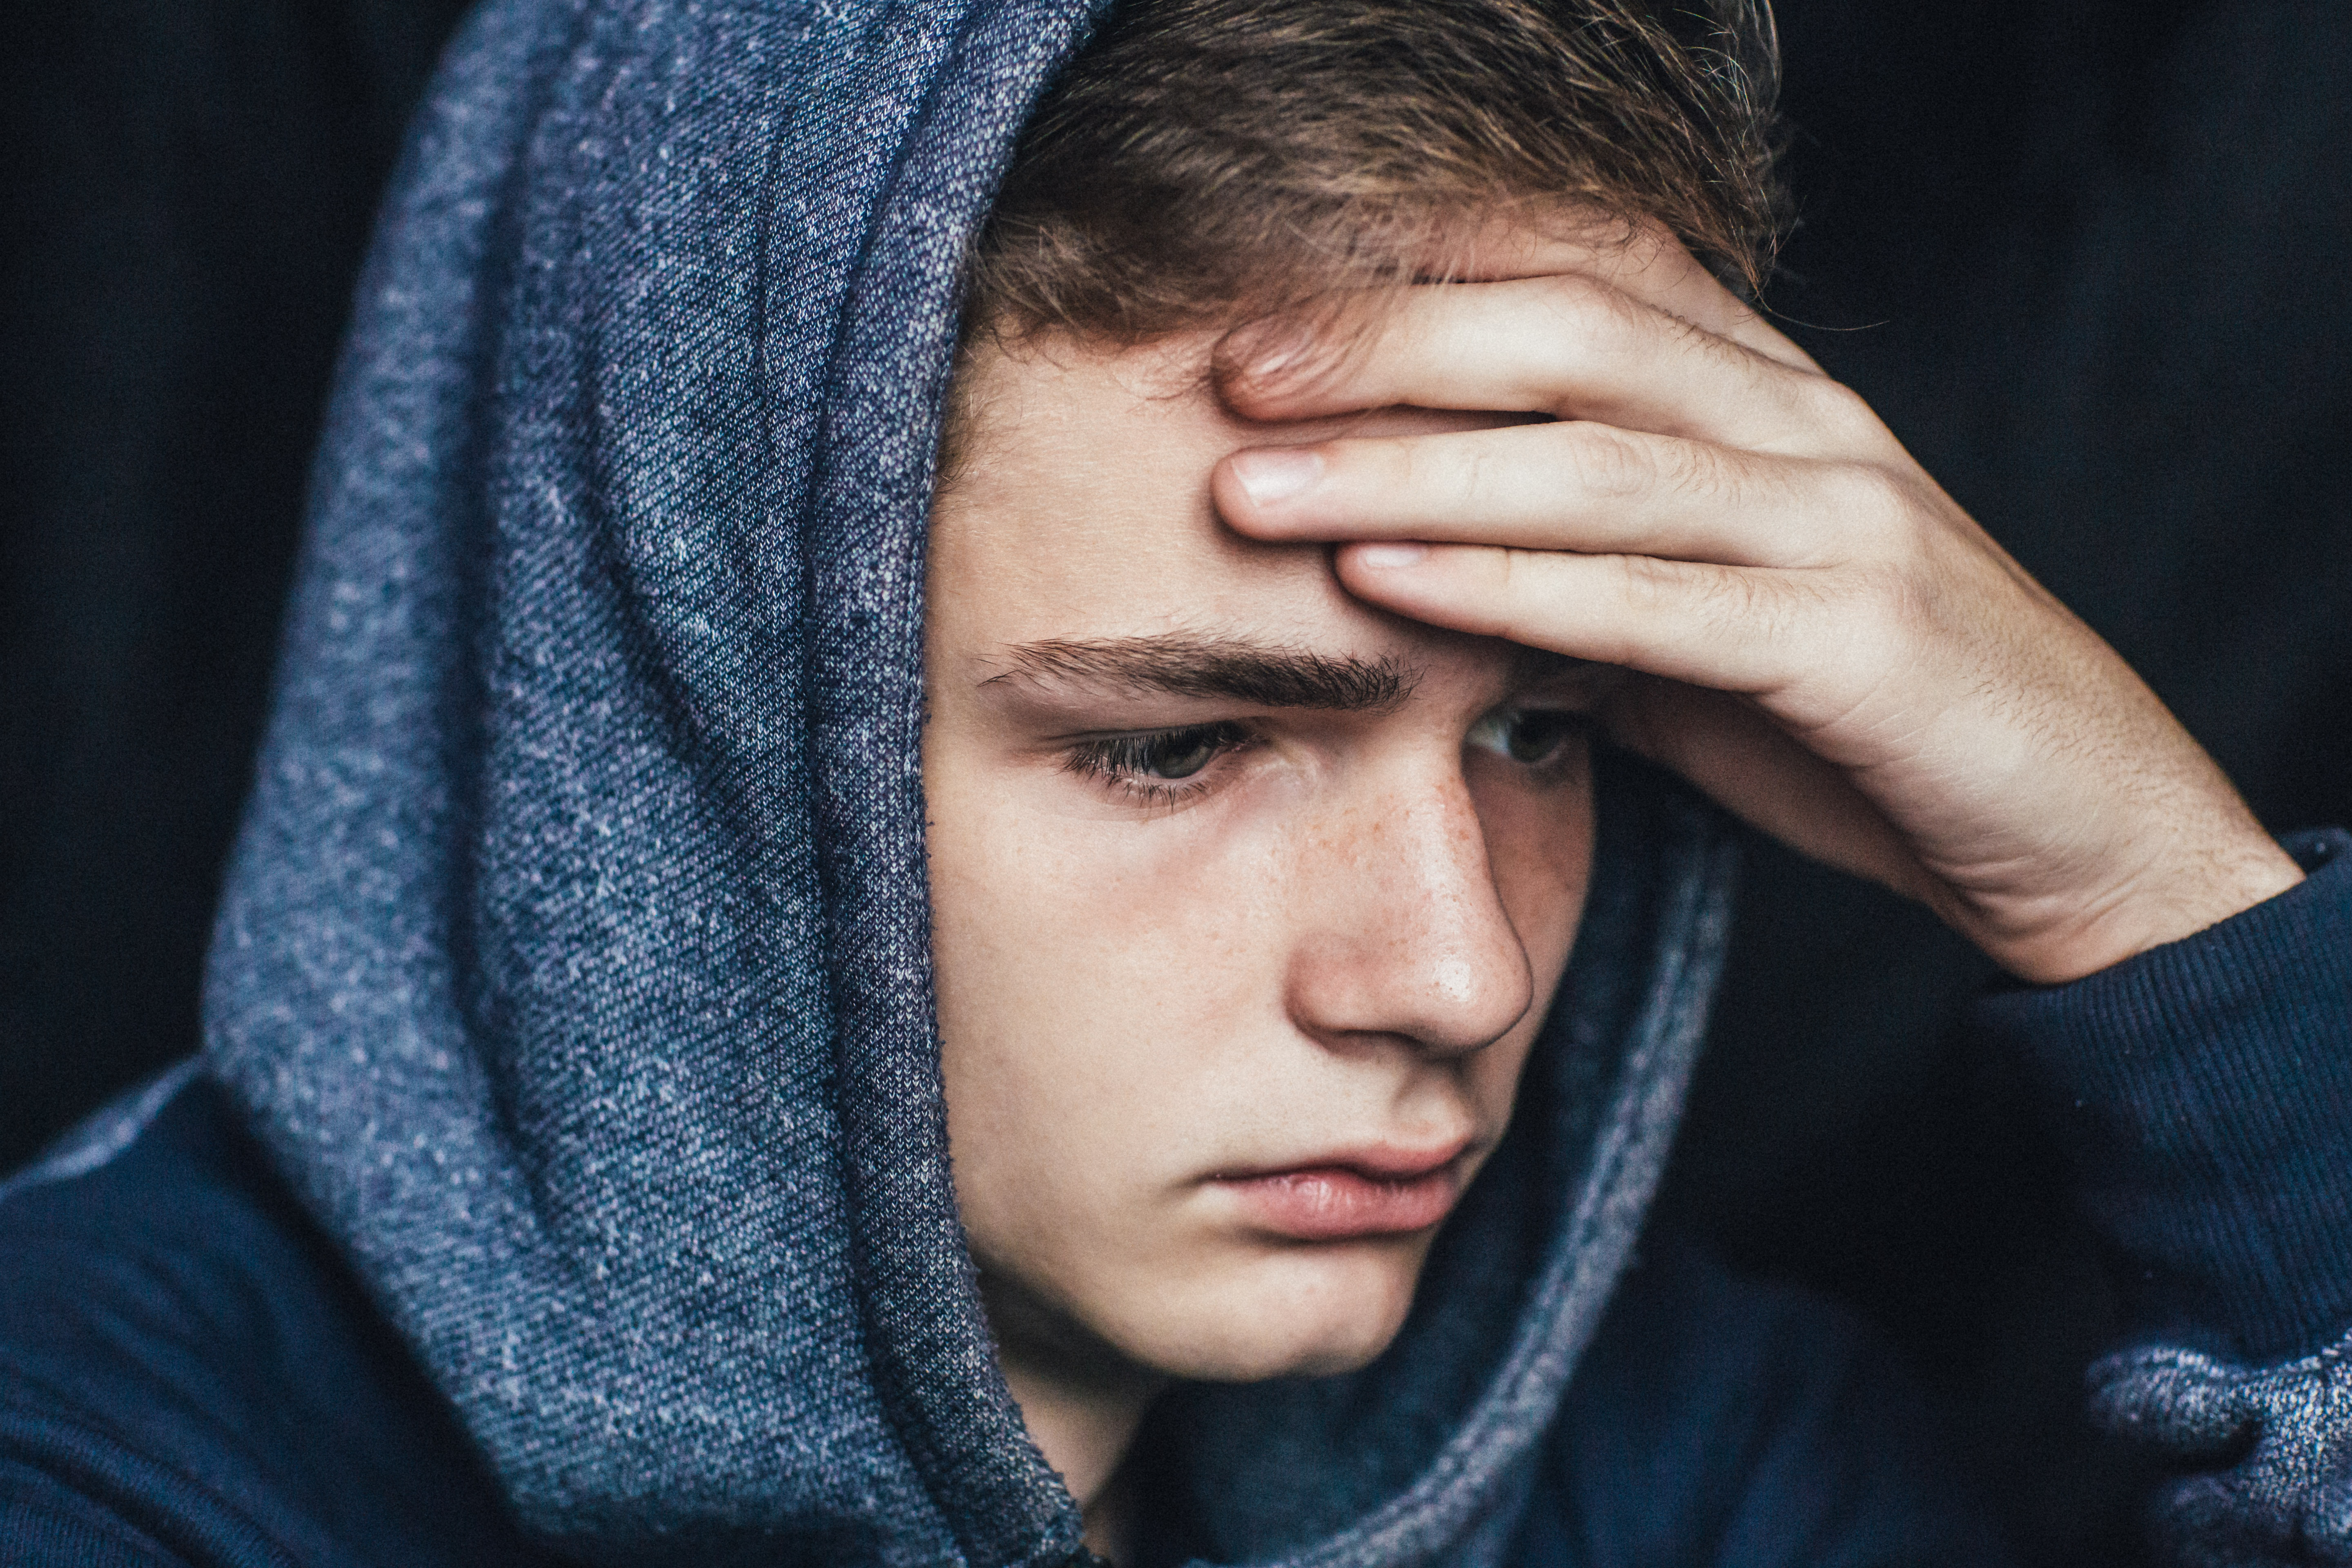 A sad young man in a blue hoodie | Source: Shutterstock